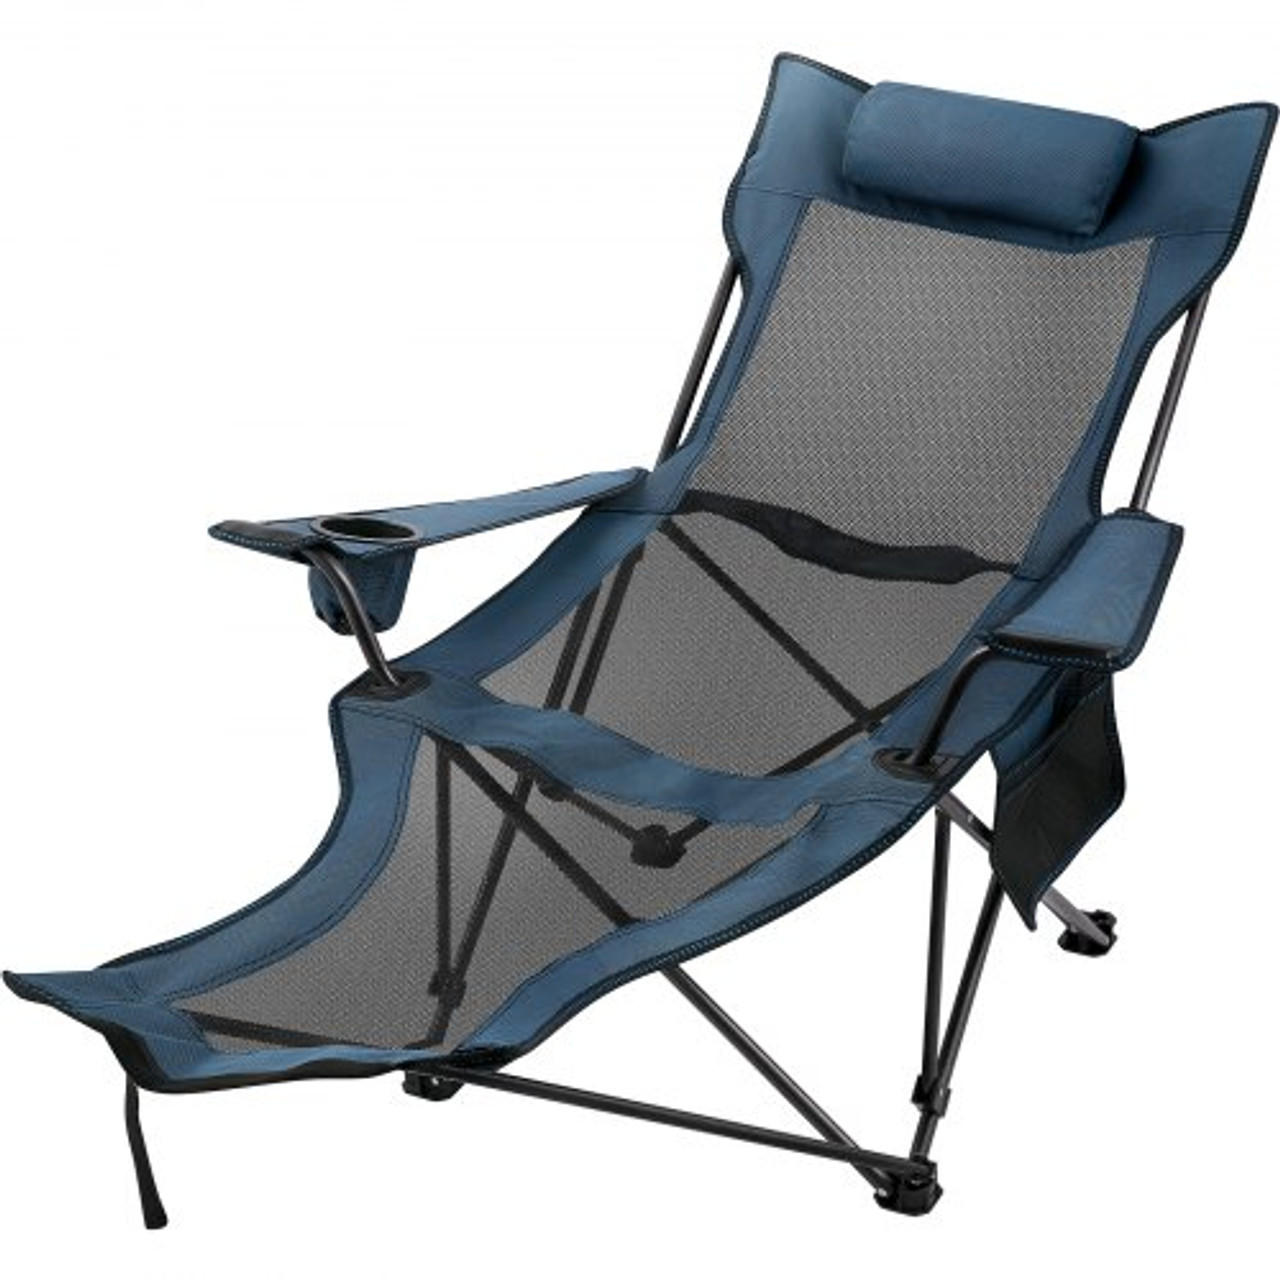 Folding Camp Chair with Footrest Mesh, Portable Lounge Chair with Cup Holder and Storage Bag, for Camping Fishing and Other Outdoor Activities (Blue)